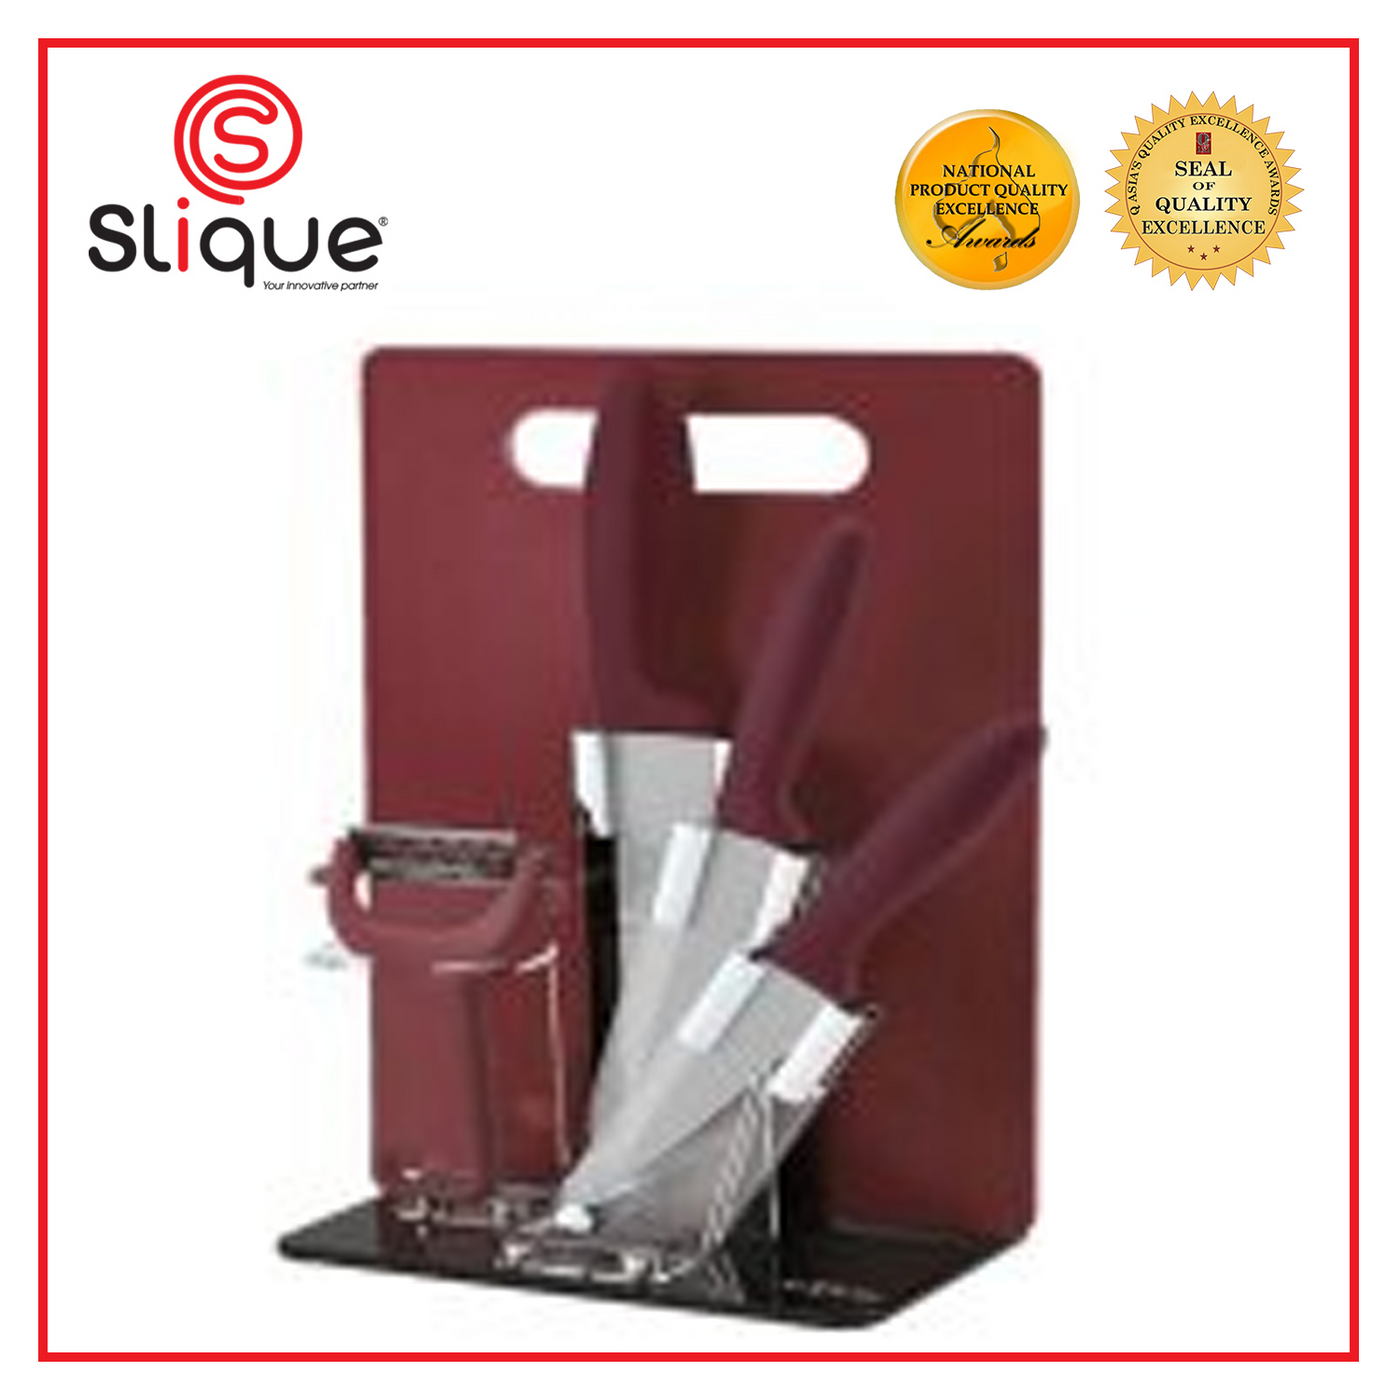 SLIQUE Premium Stainless Steel Kitchen Knife Block w/ Peeler Cutting Board Set of 6 Amazing Gift Idea For Any Occasion! (Red)